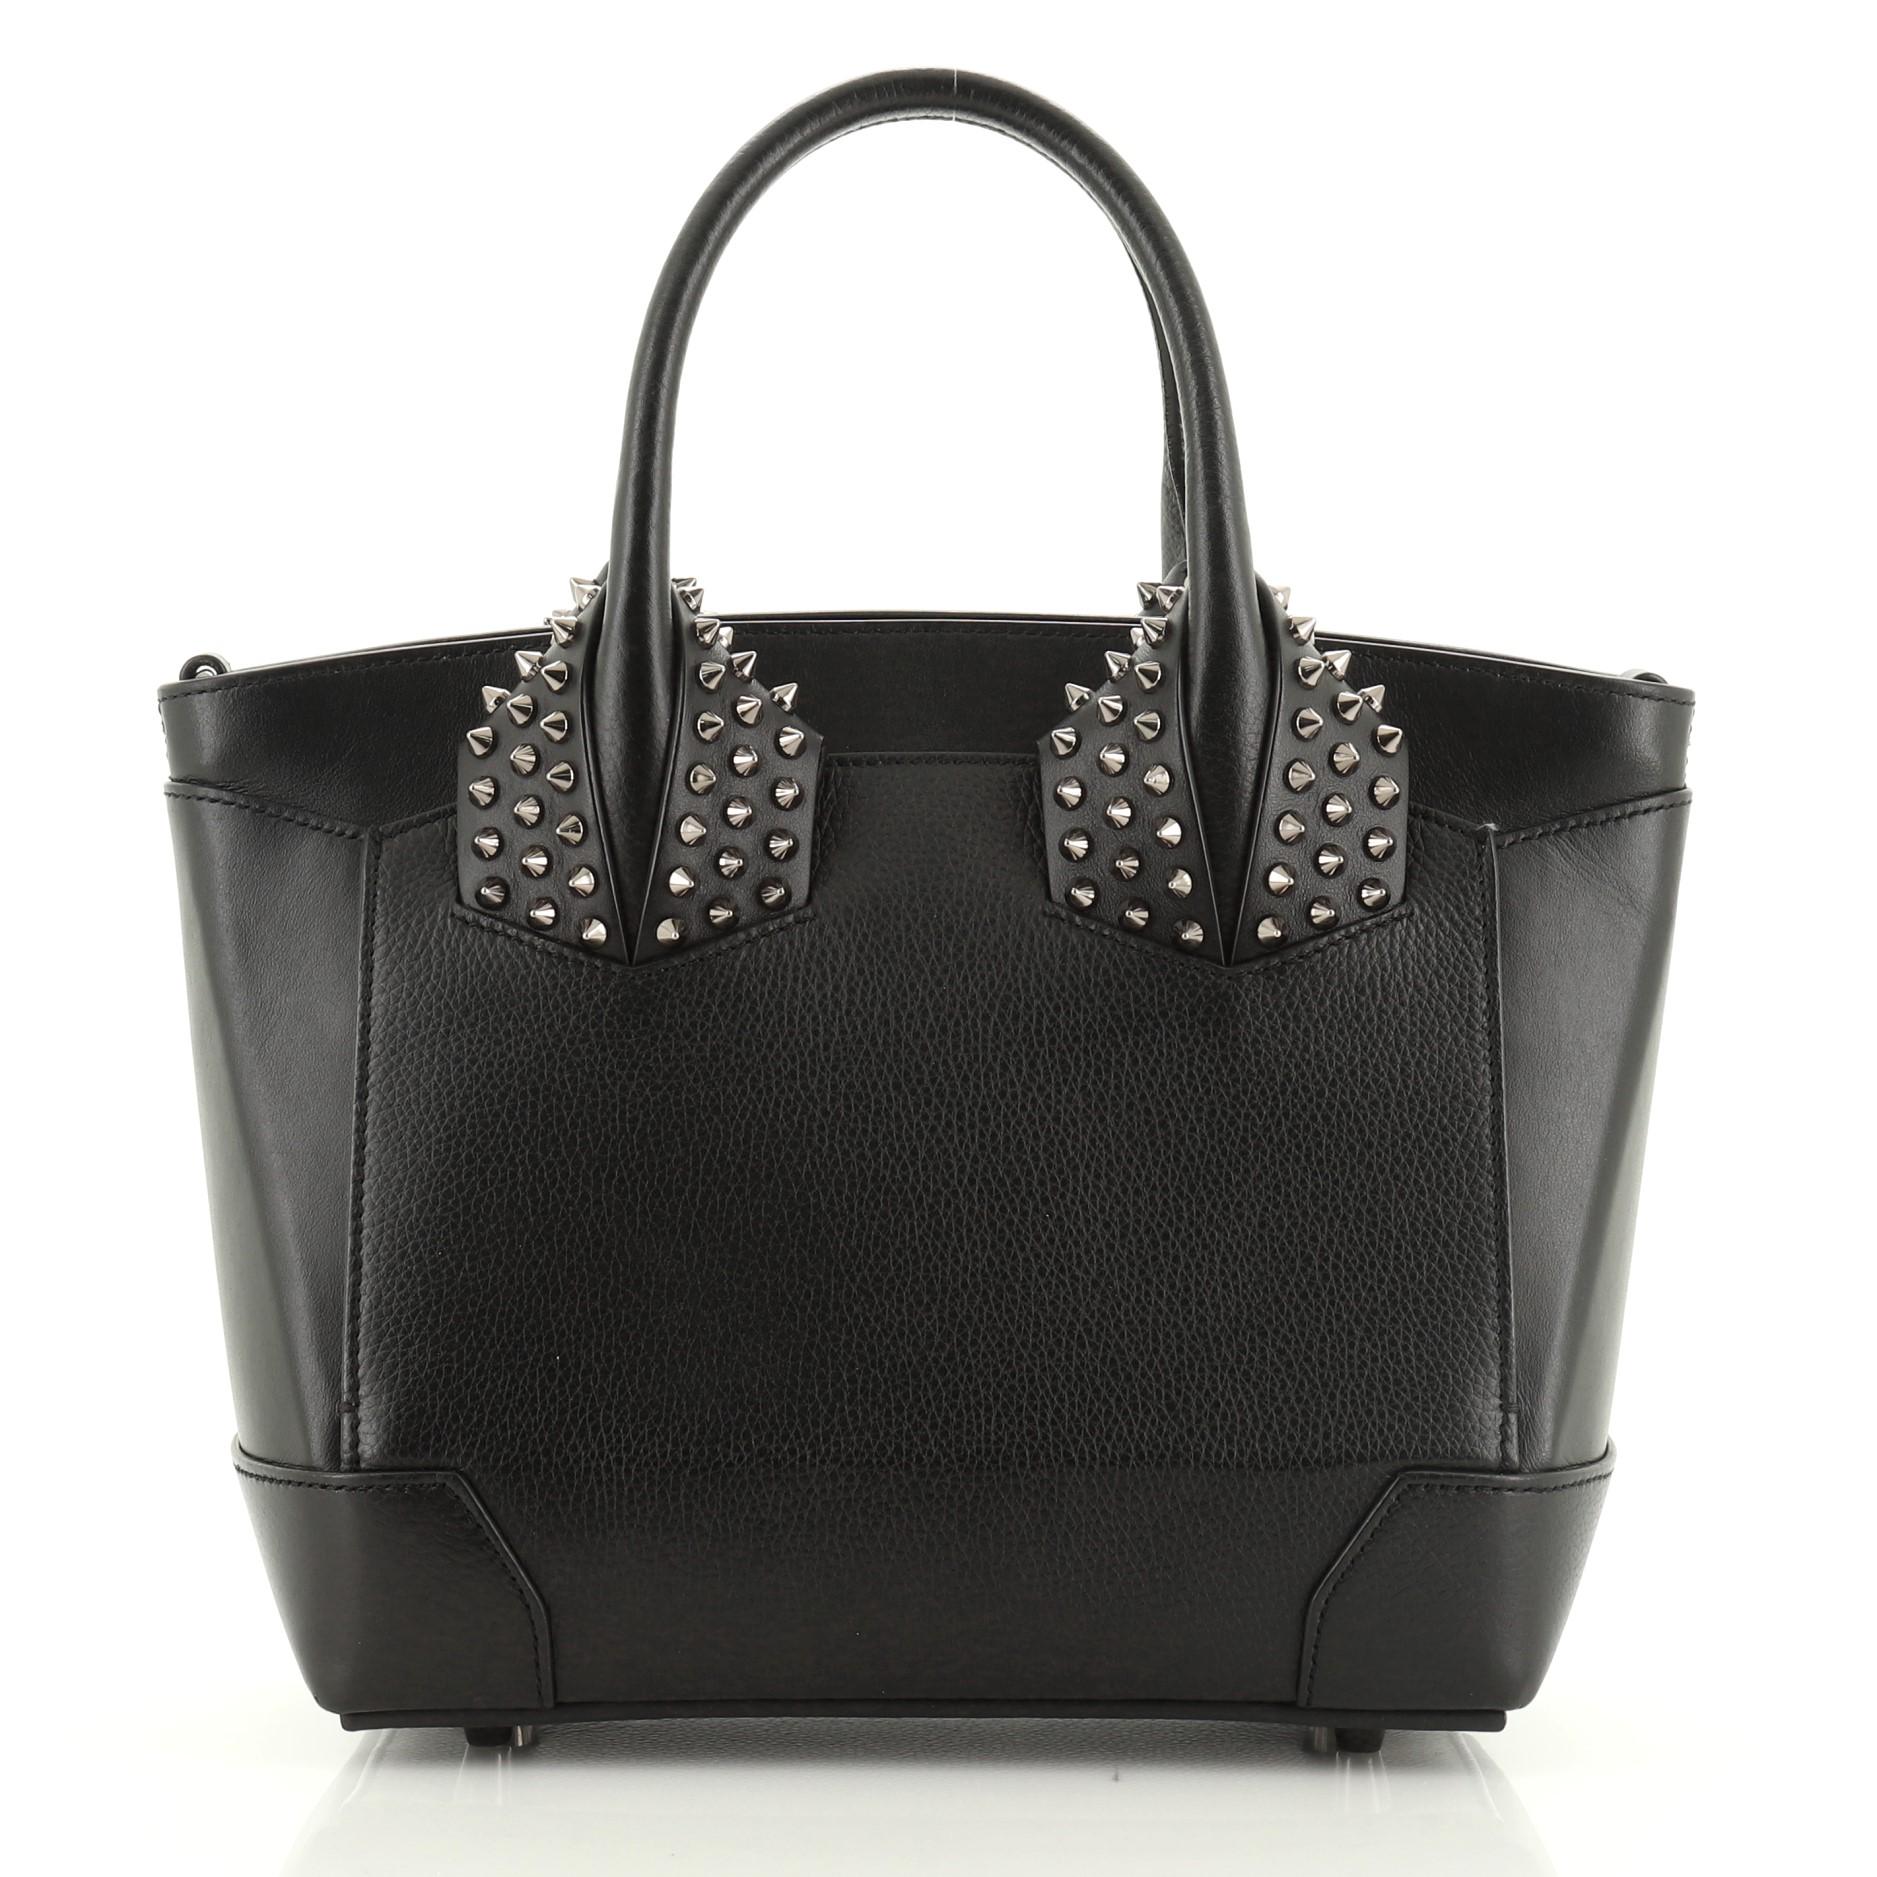 Black Eloise Satchel Spiked Leather Small